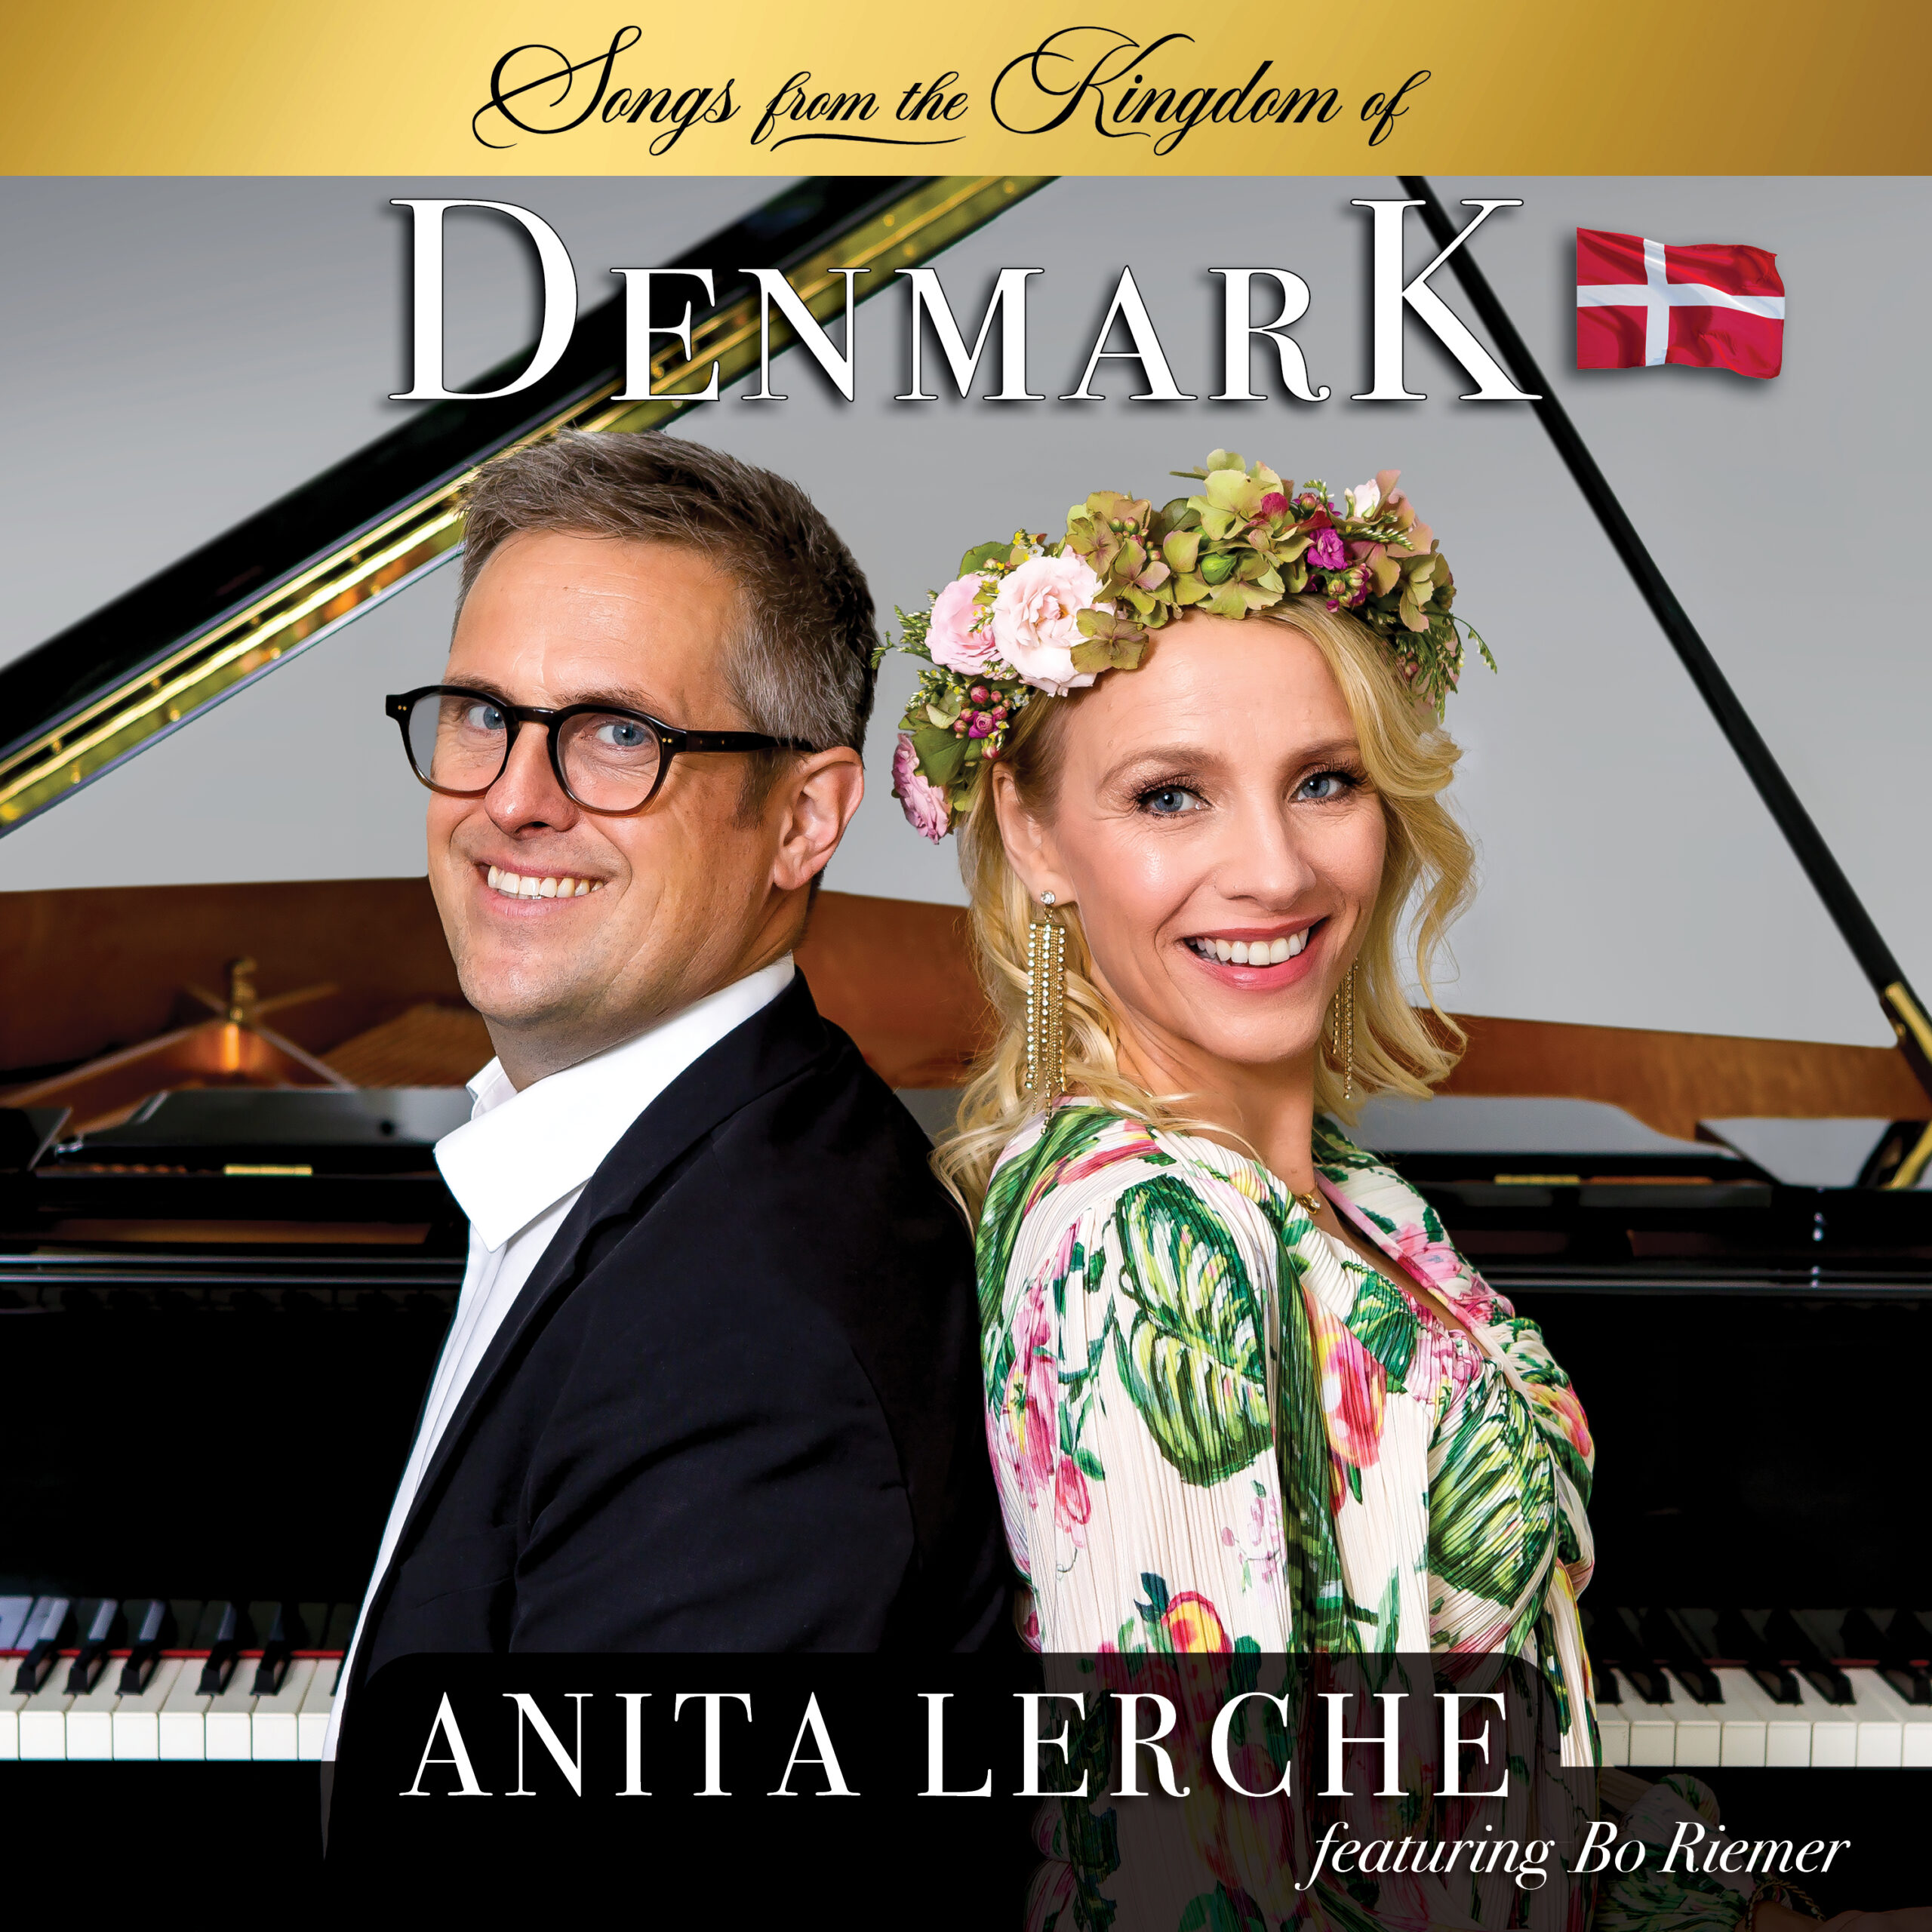 Songs from the Kingdom of Denmark